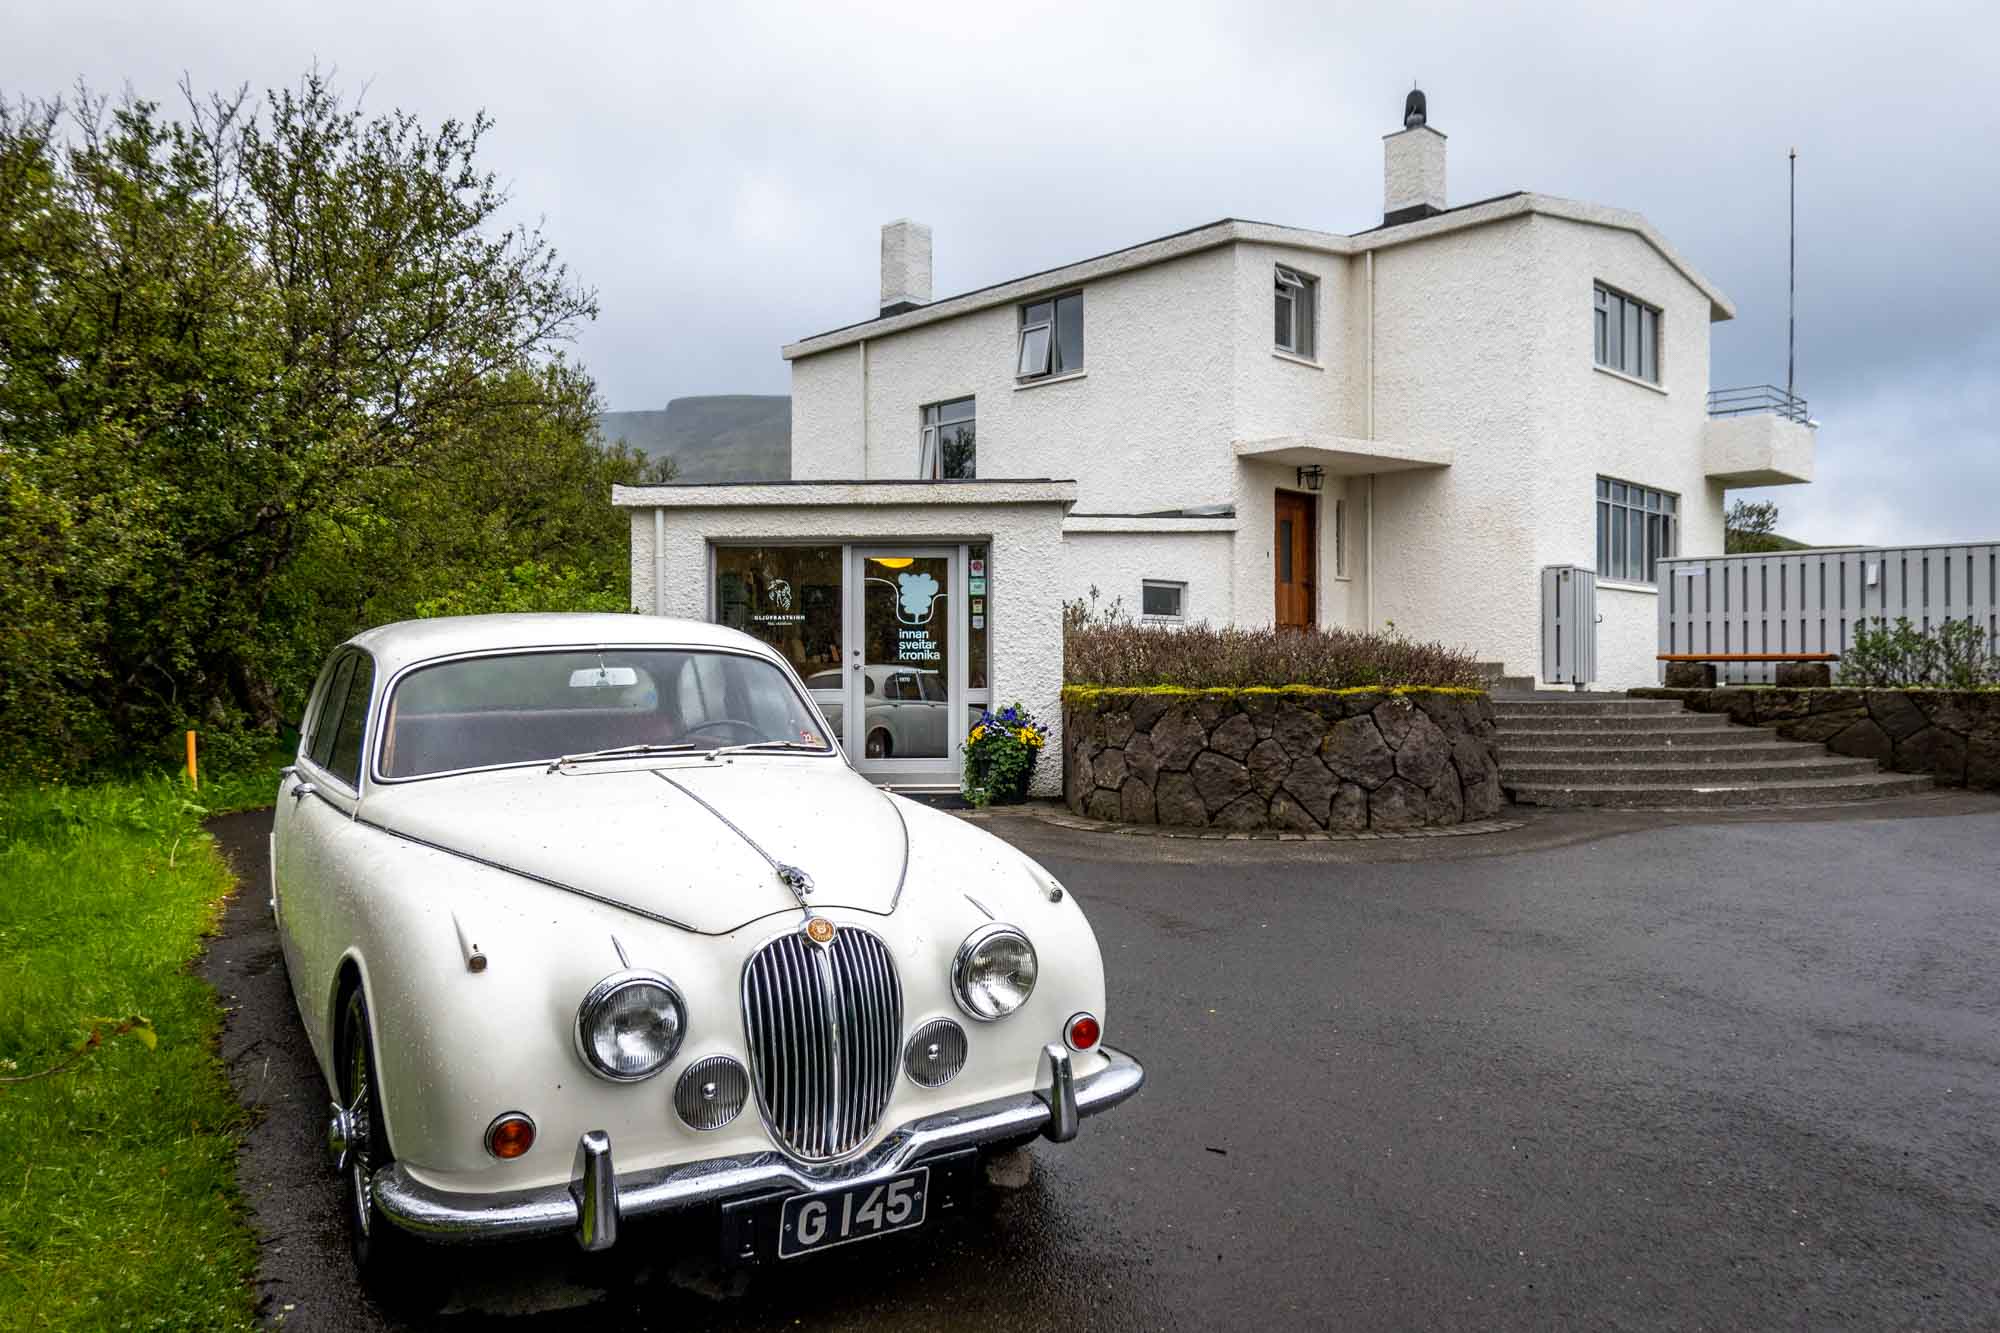 White Jaguar car in front of home of Halldor Laxness on the Golden Circle